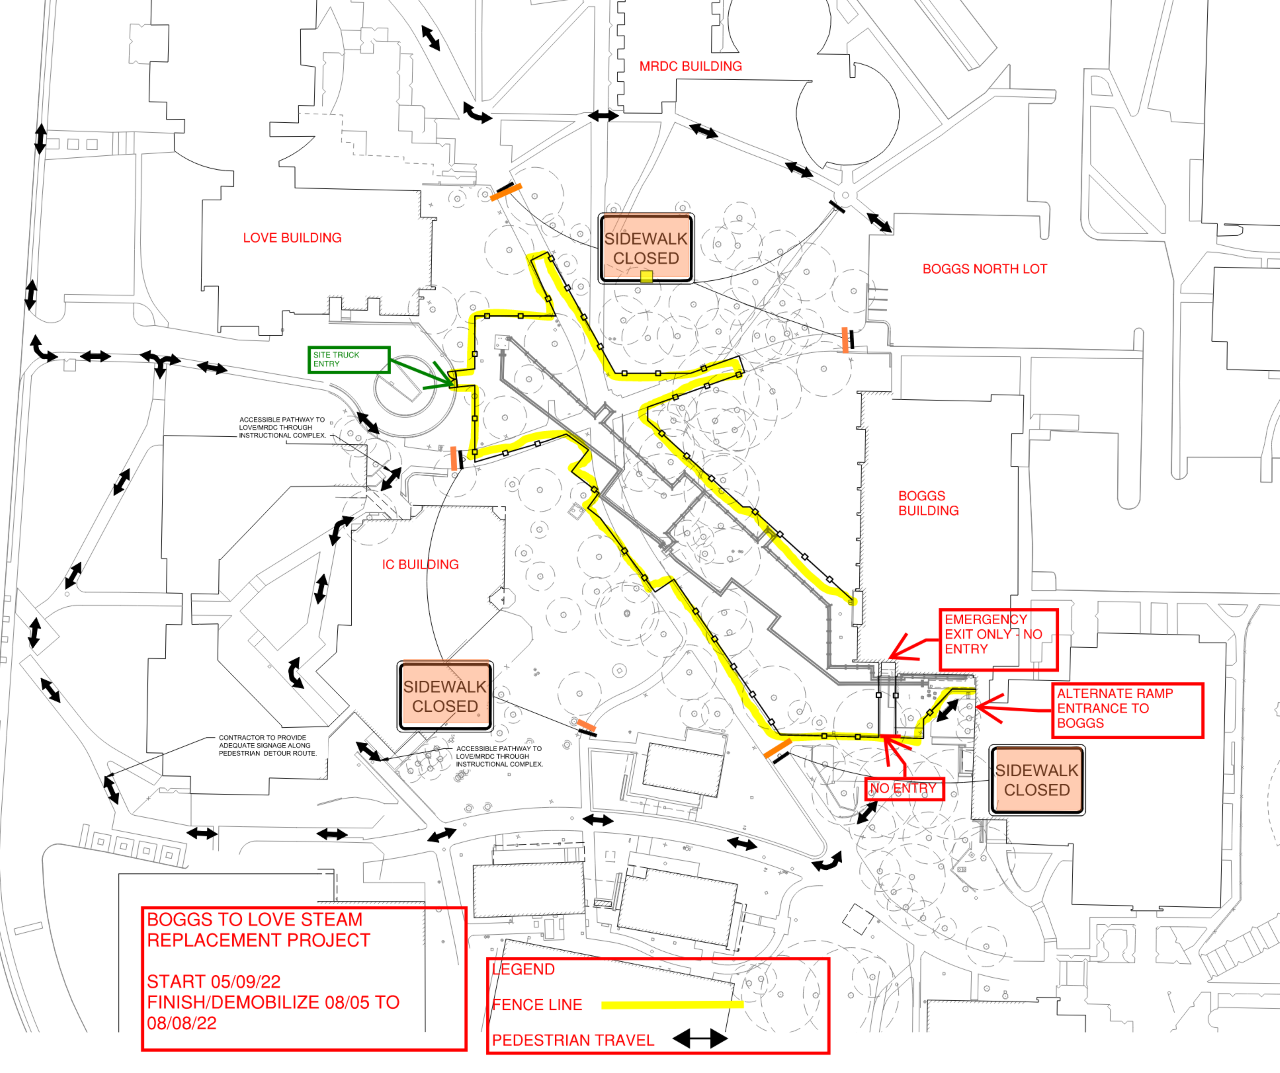 Map of fencing mobilization for steam line replacement project.